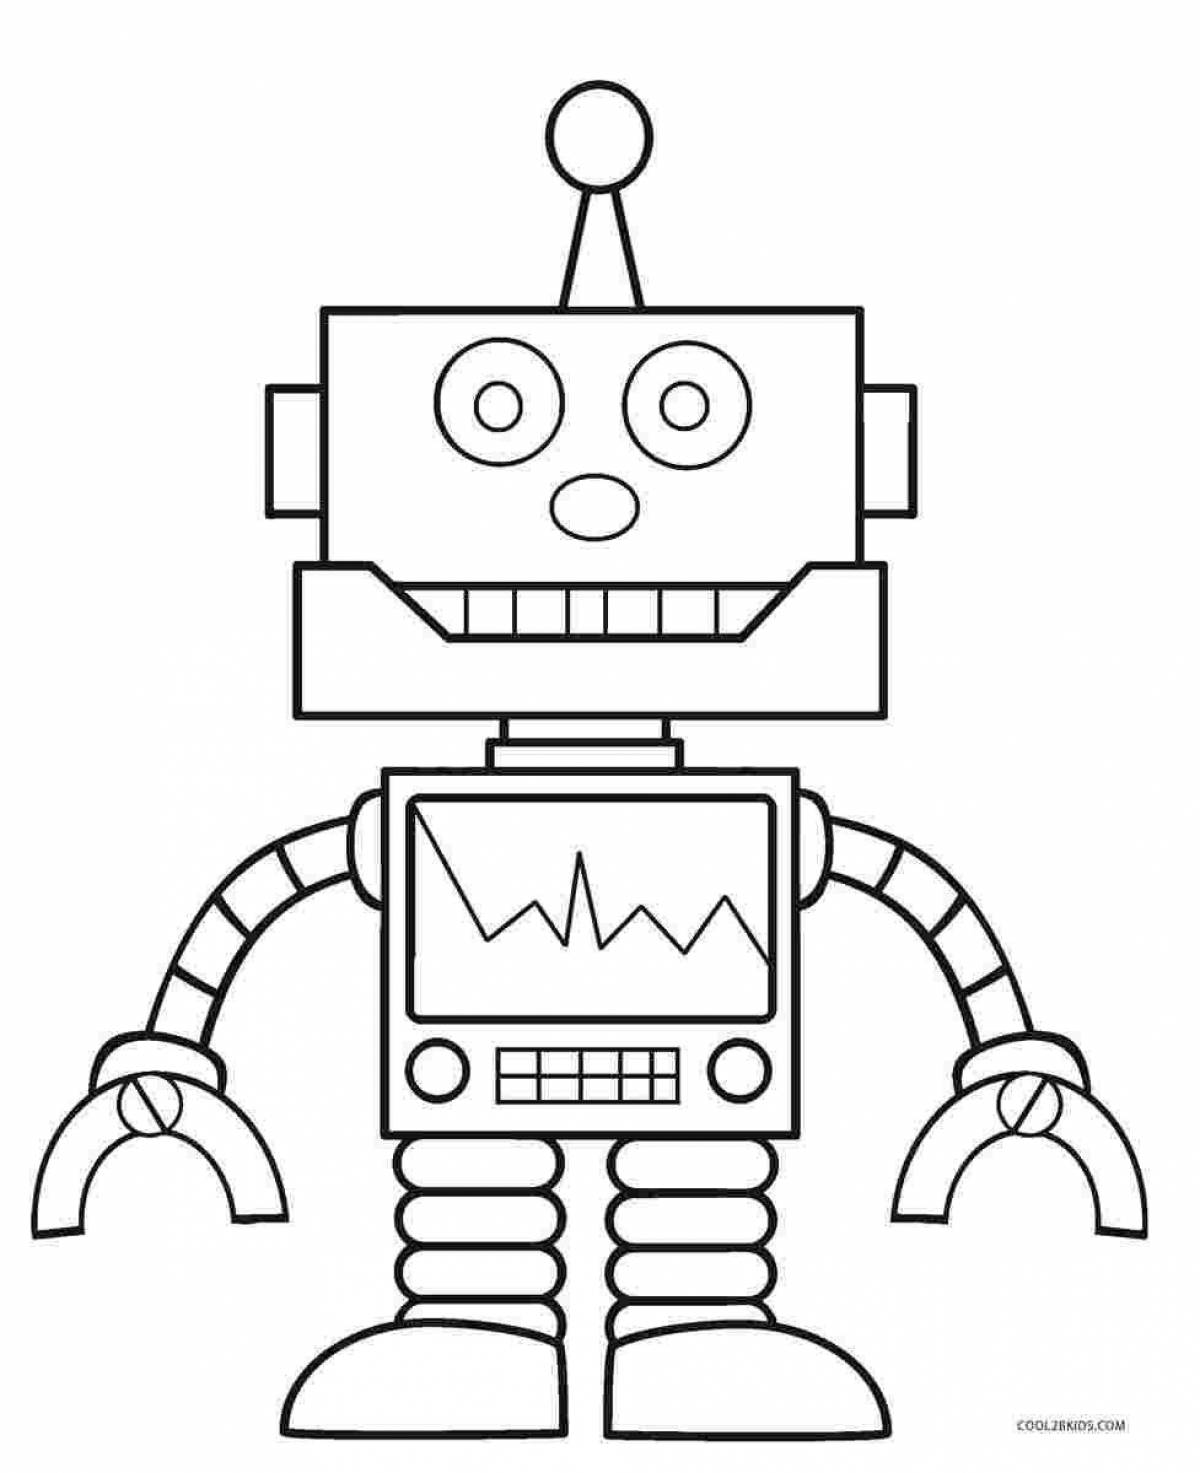 Color-bright robot coloring page for boys